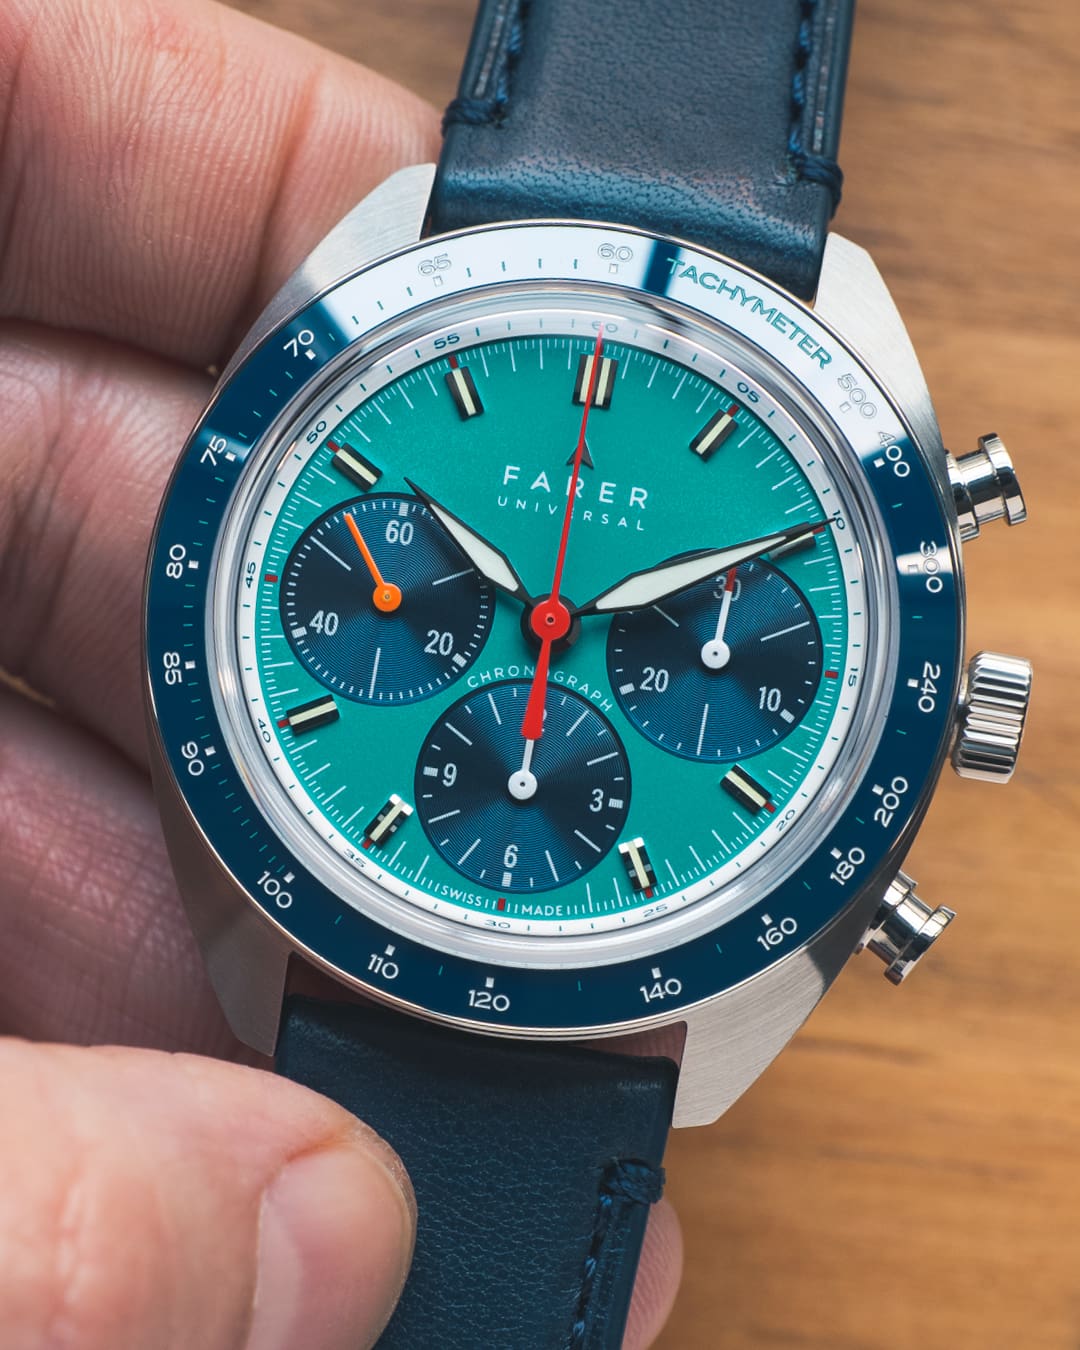 INTRODUCING: Farer’s new Carnegie Chronograph Sport